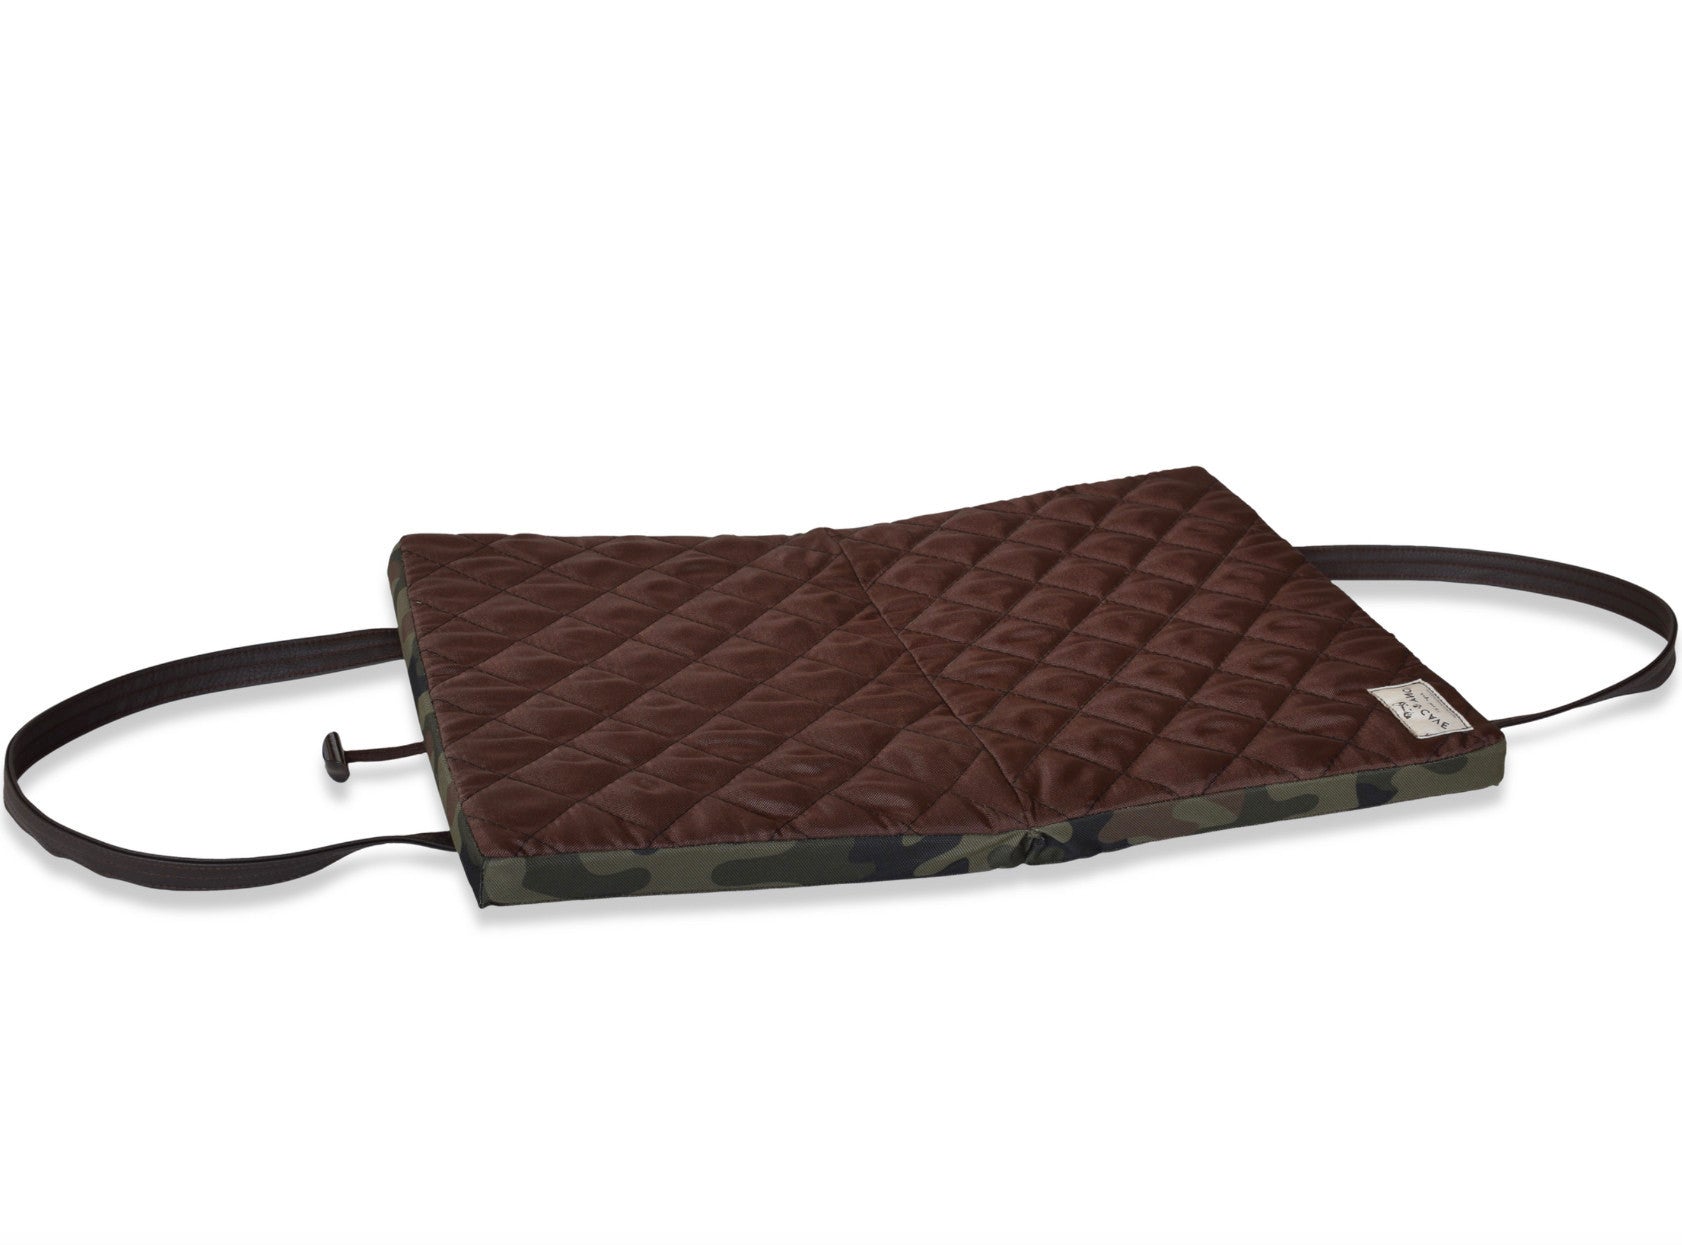 KONA CAVE® - Your Dog Needs This Travel Bed for Security and Comfort